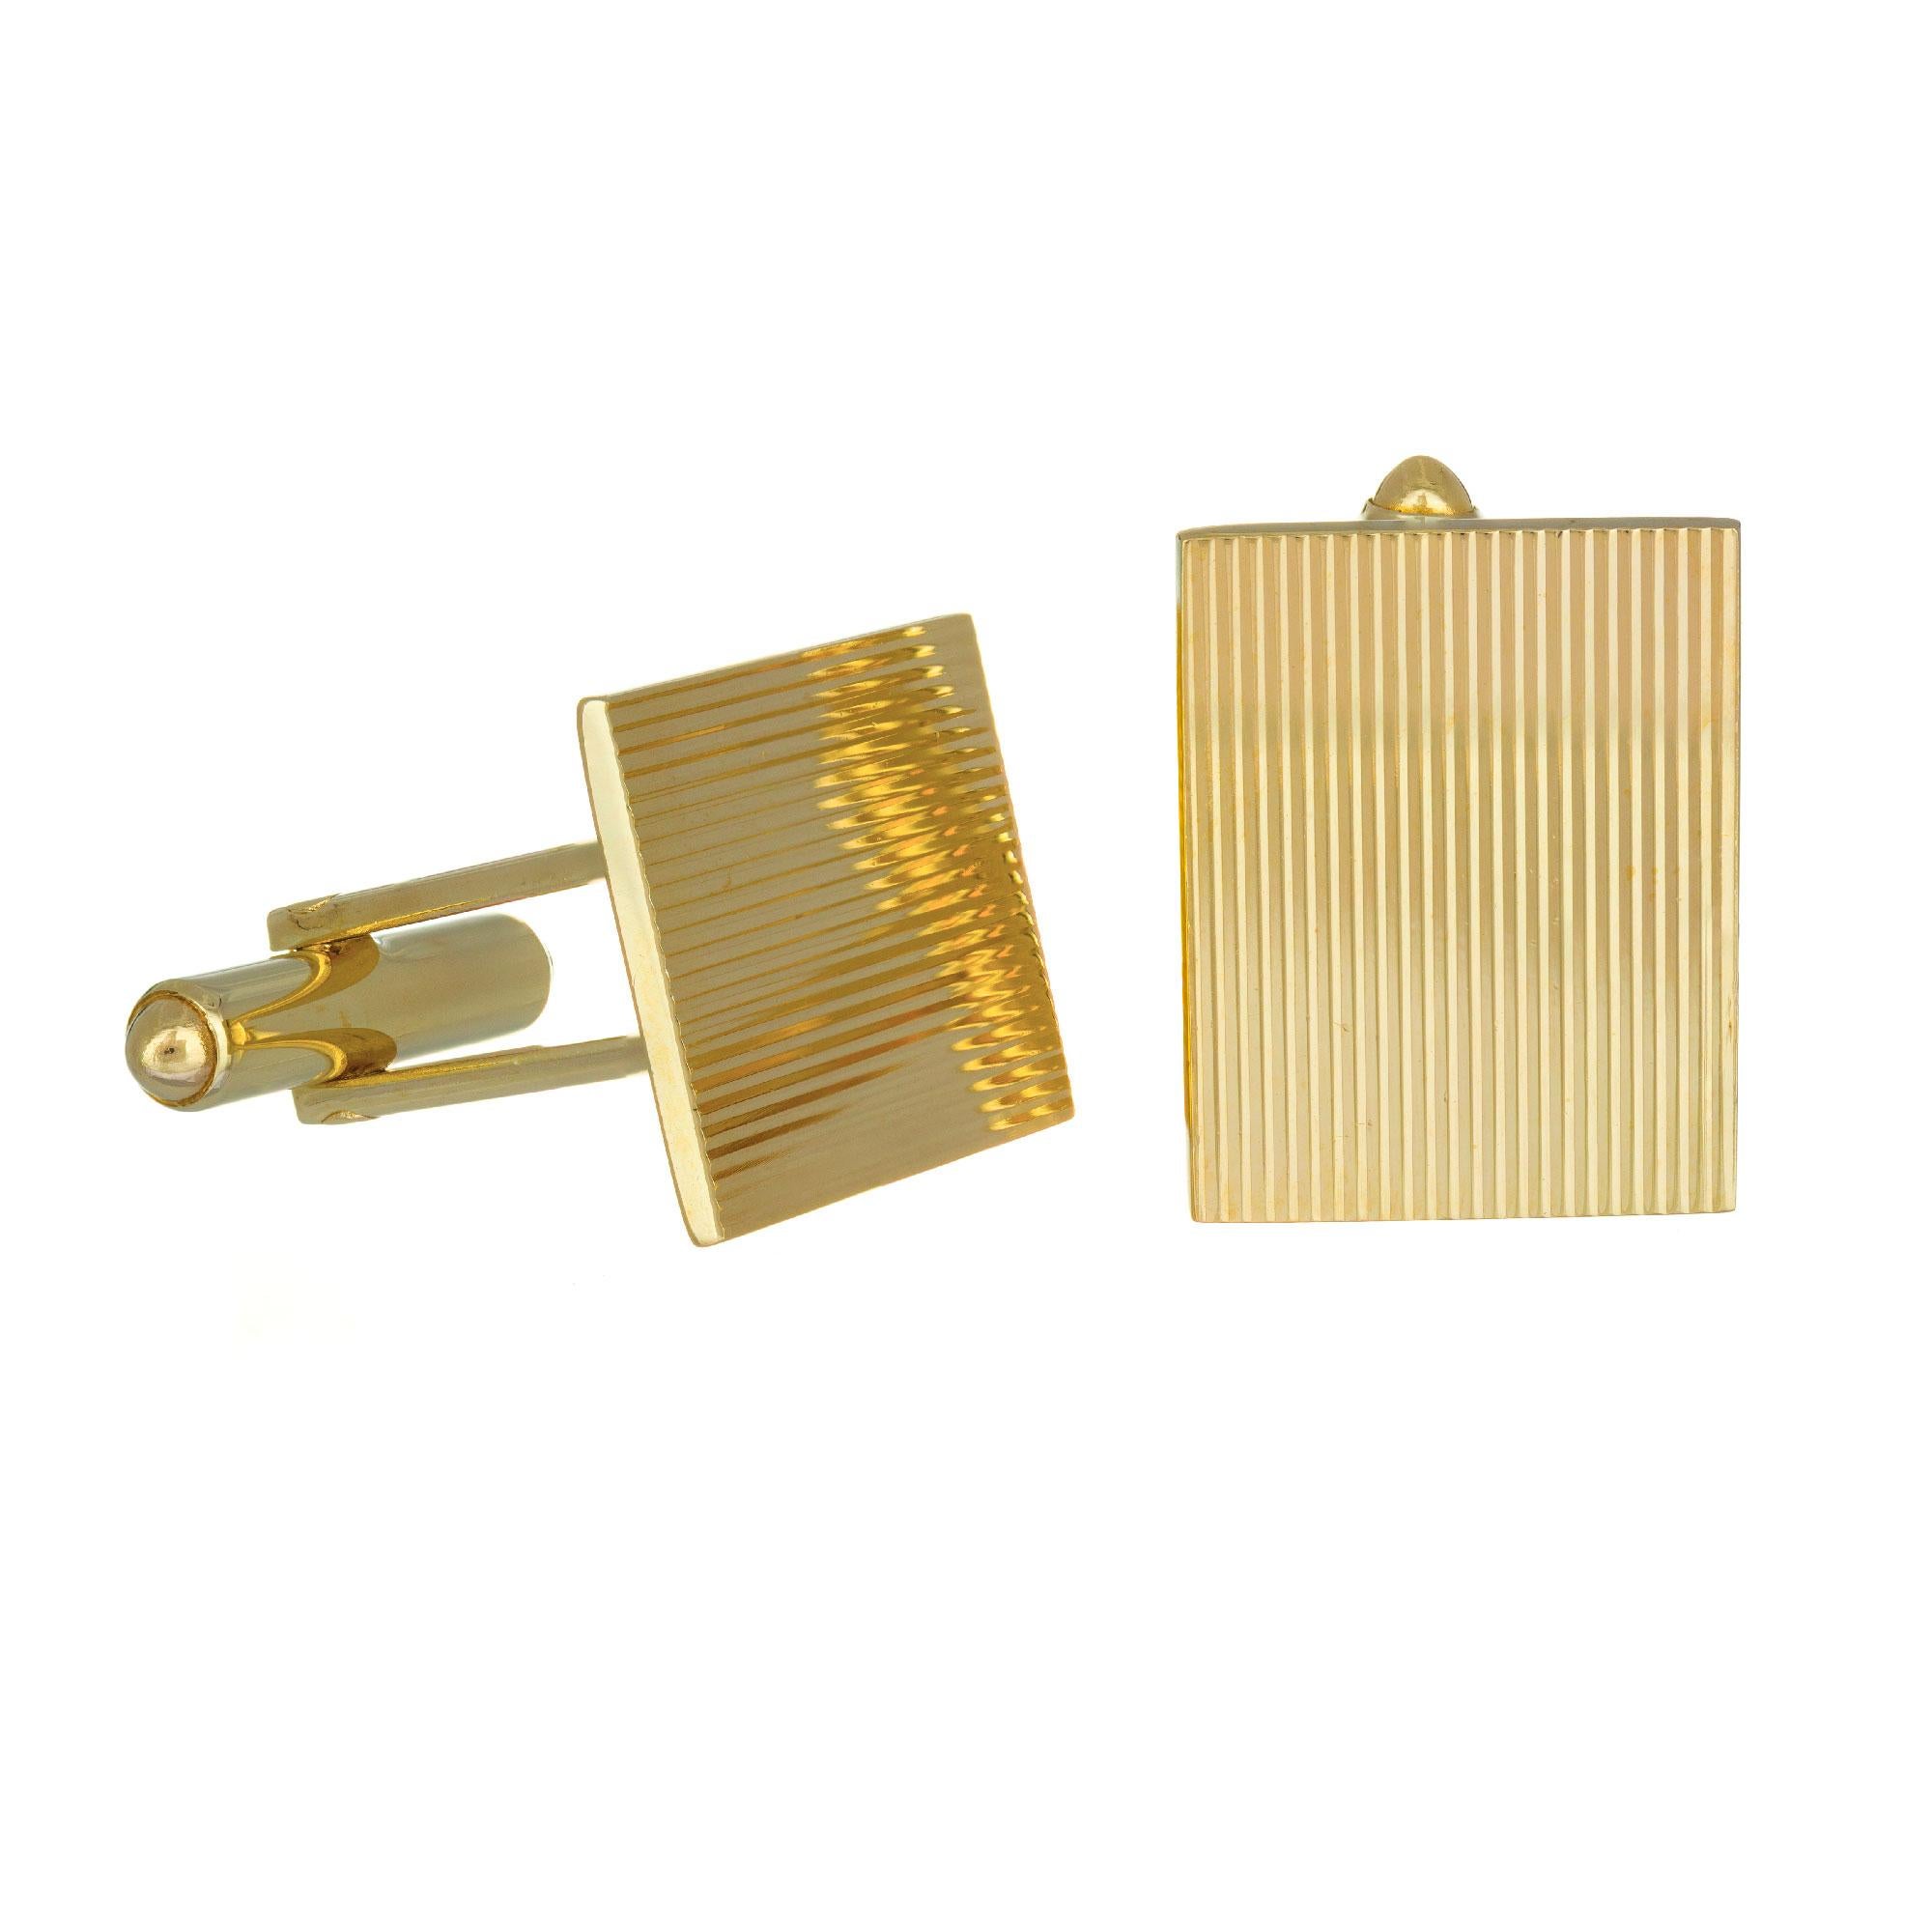 Vintage 1960's 14k yellow gold rectangular lined men's cufflinks.

14k yellow gold 
Stamped: 14k
14.2 grams
Top to bottom: 14.9mm or 9/16 Inch
Width: 18.9mm or ¾ Inch
Depth or thickness: 1.3mm

